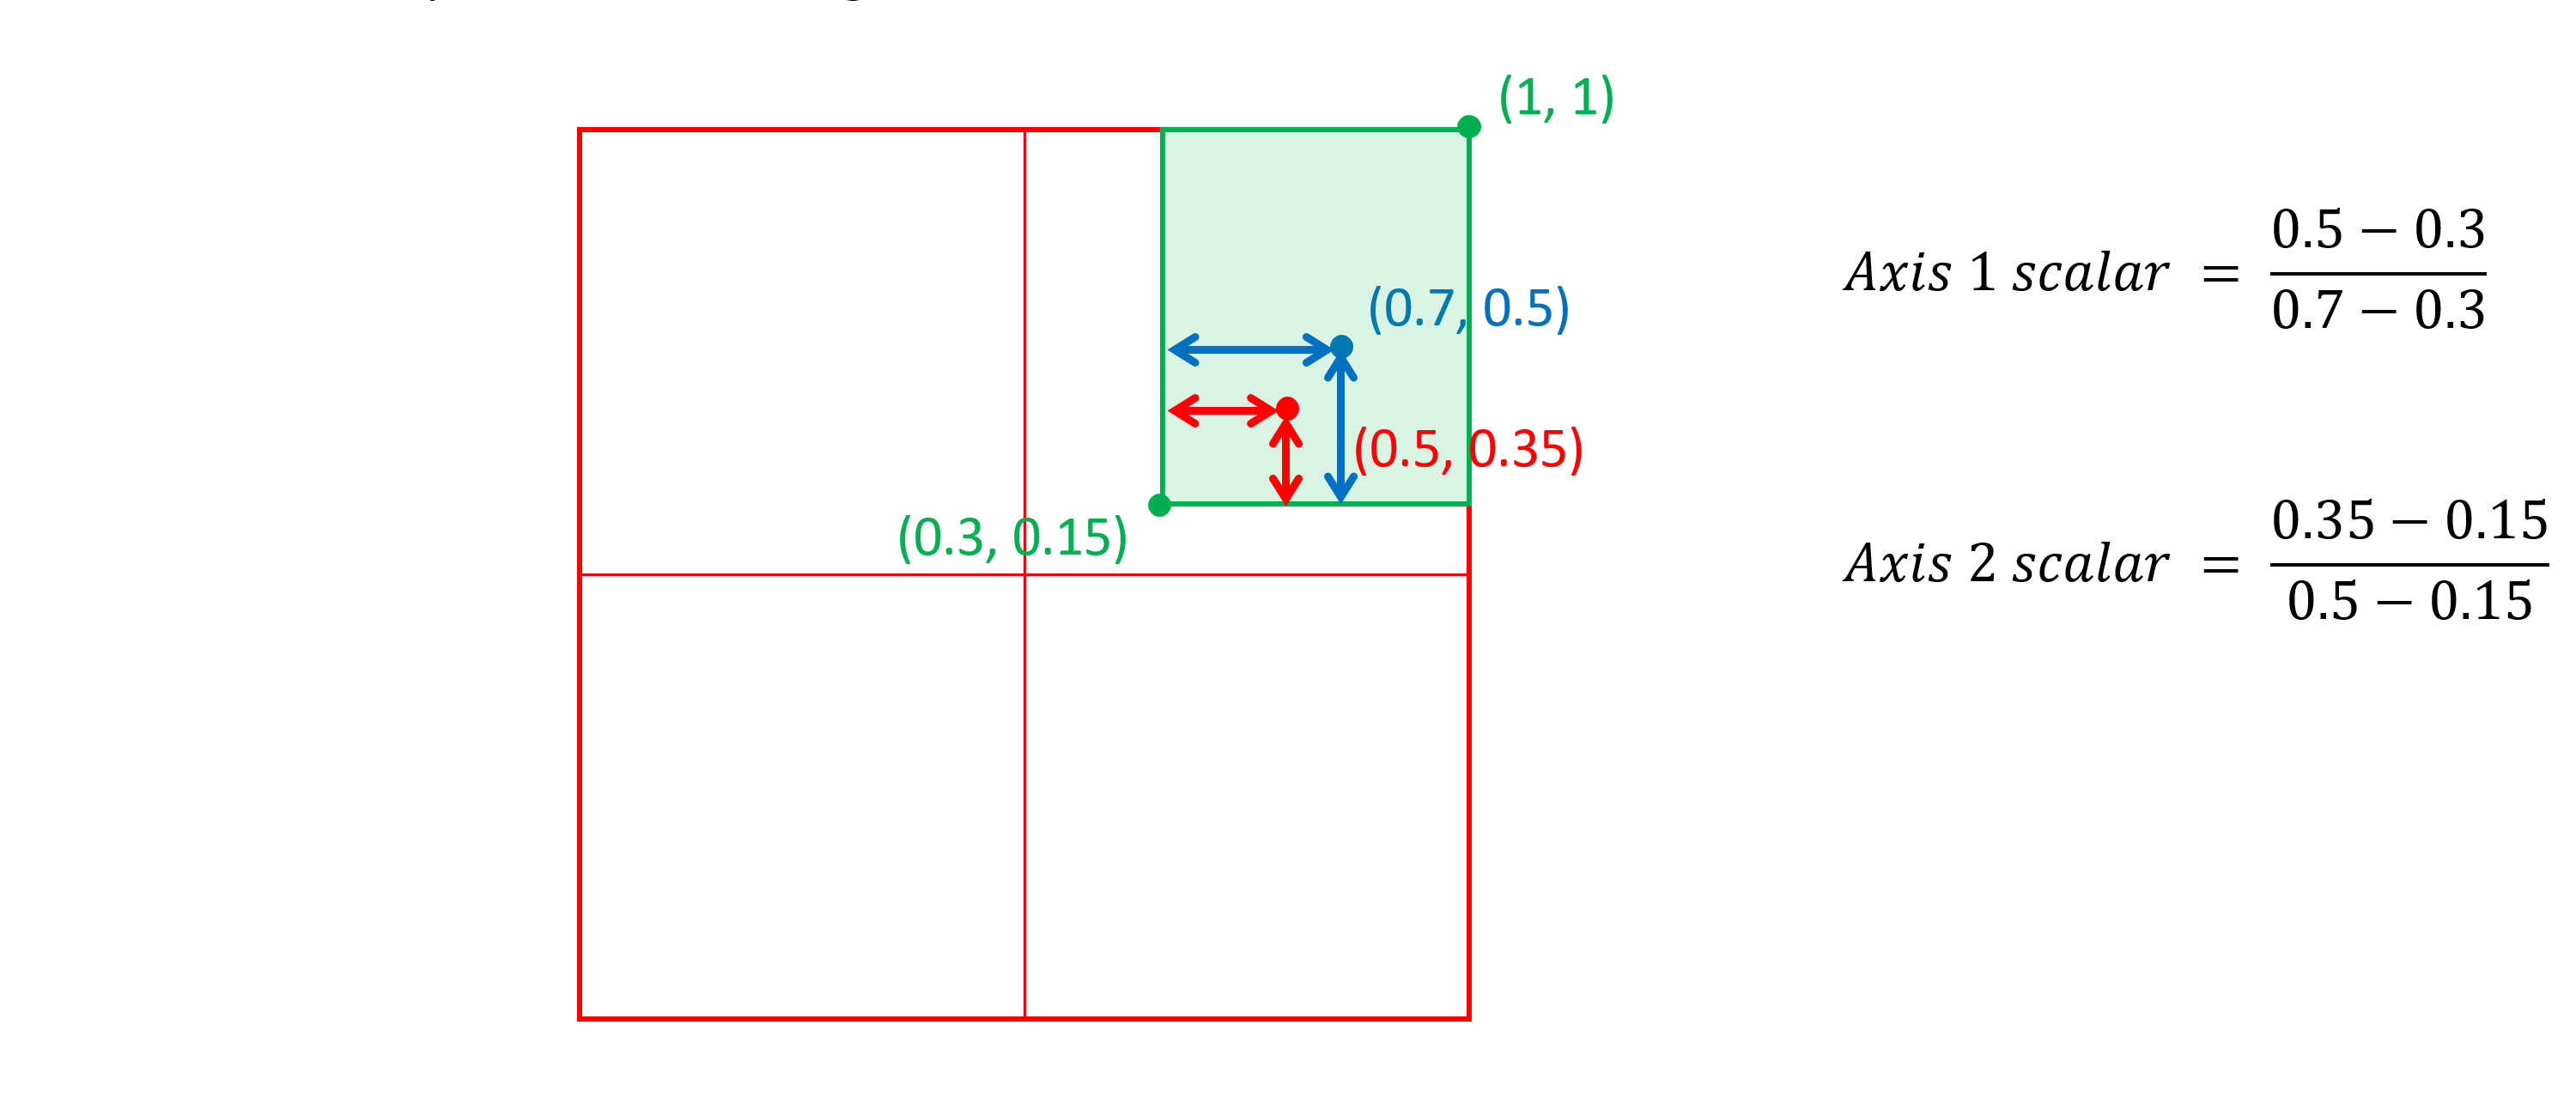 A Cartesian space with a rectangular region, and the values used to calculate per-axis scalars